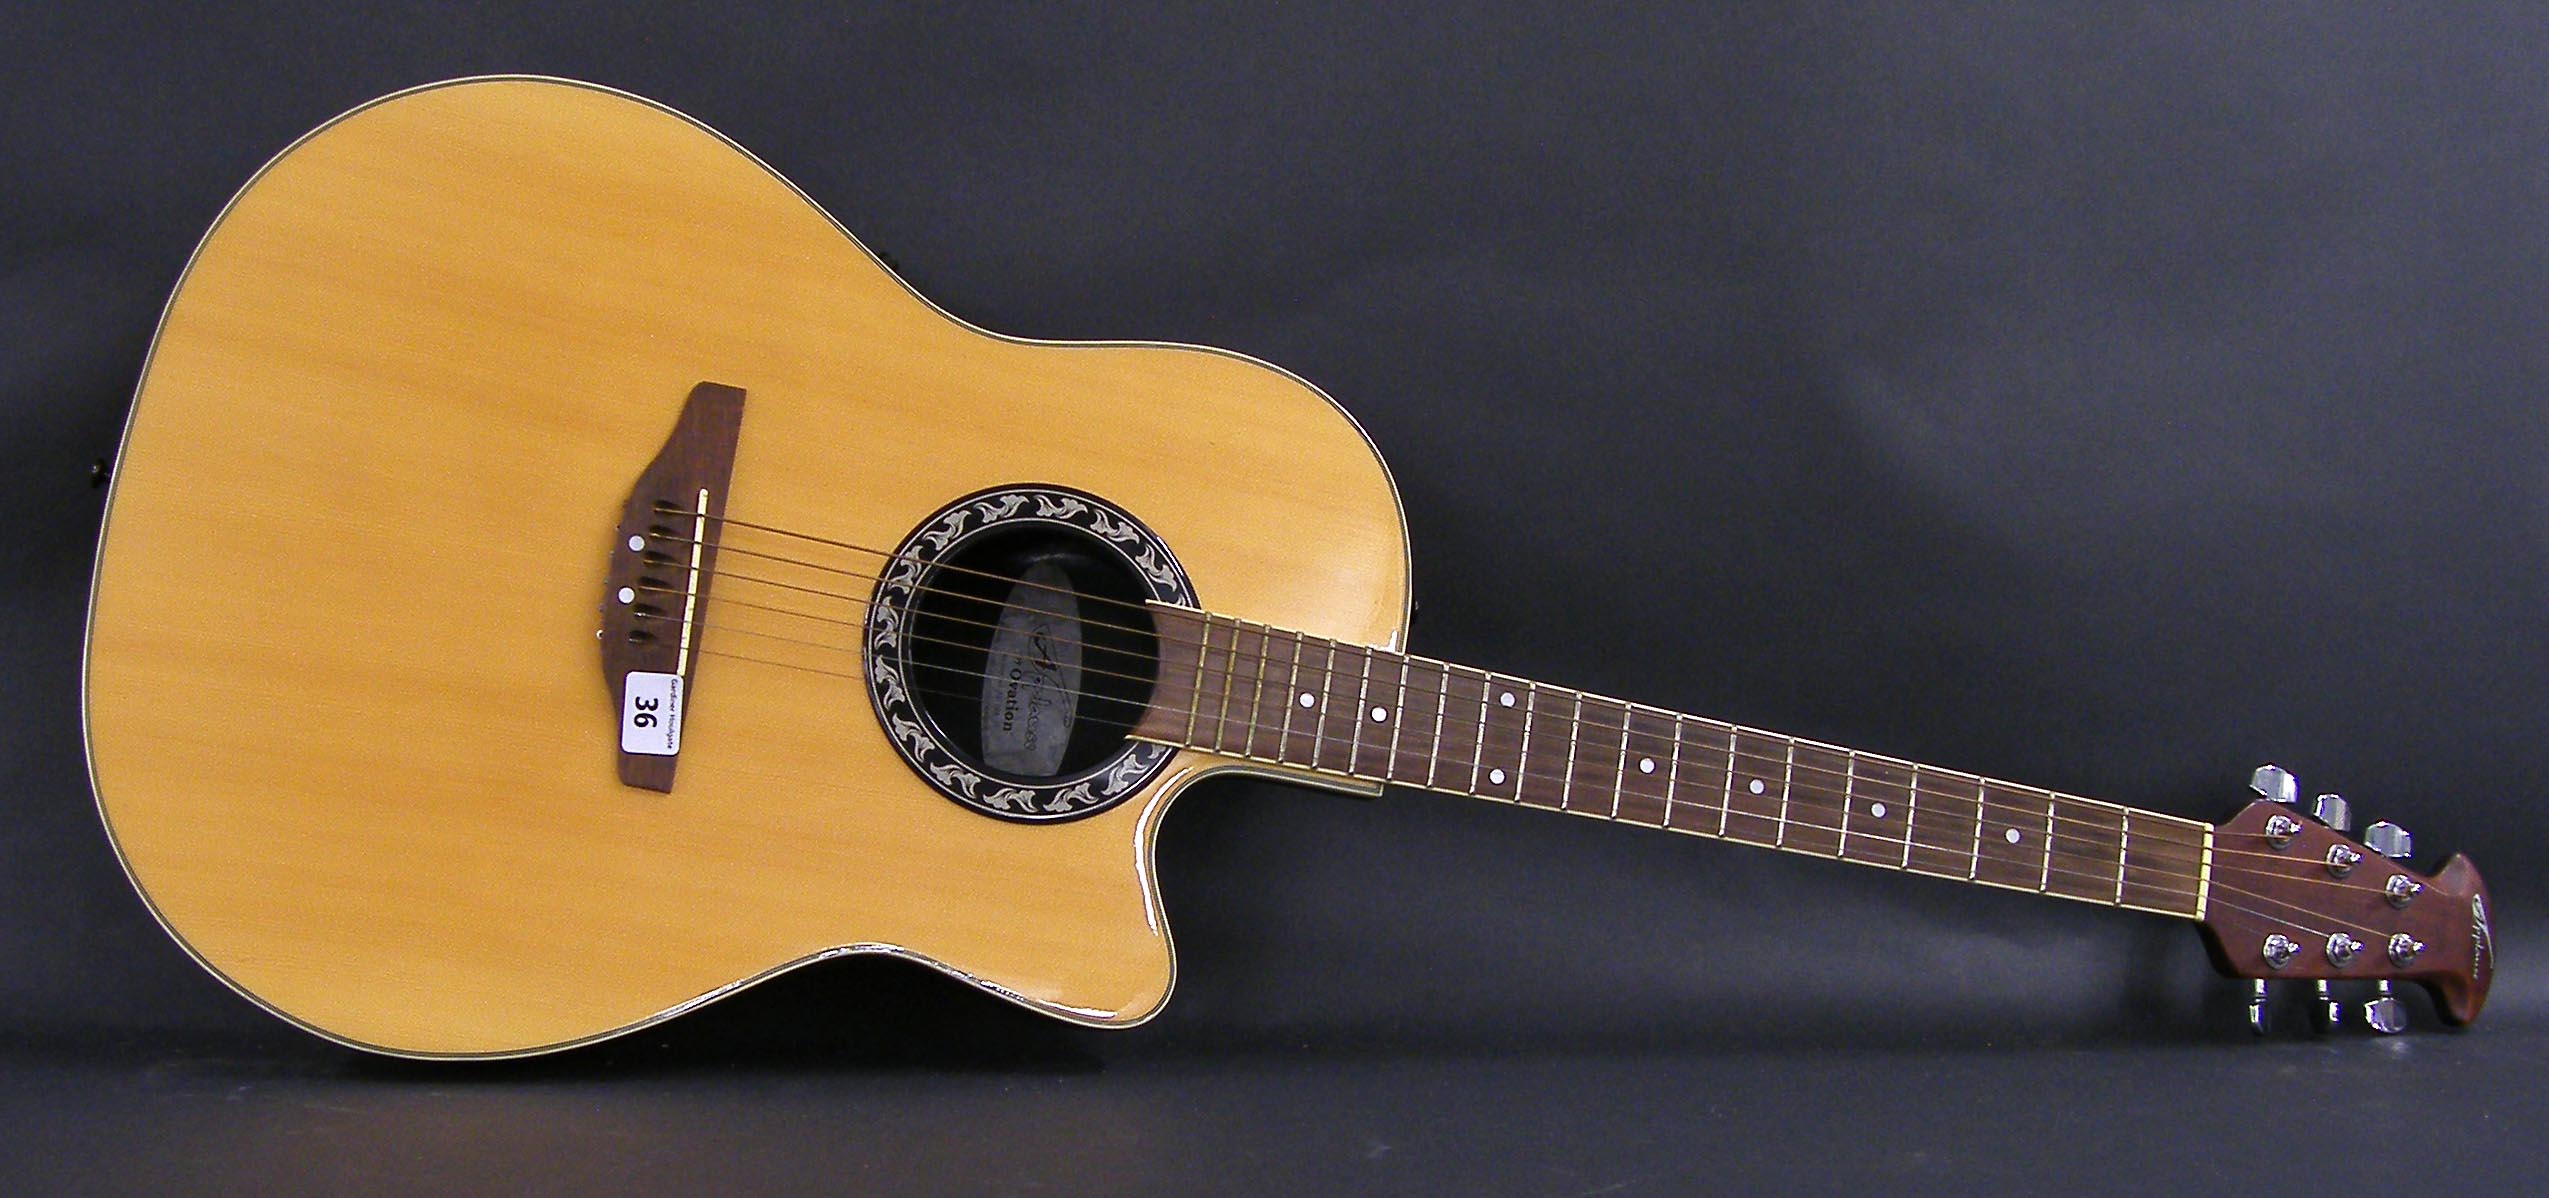 Applause by Ovation, AE128 electro-acoustic guitar, ser. no. 4737675, natural finish, bowl back,